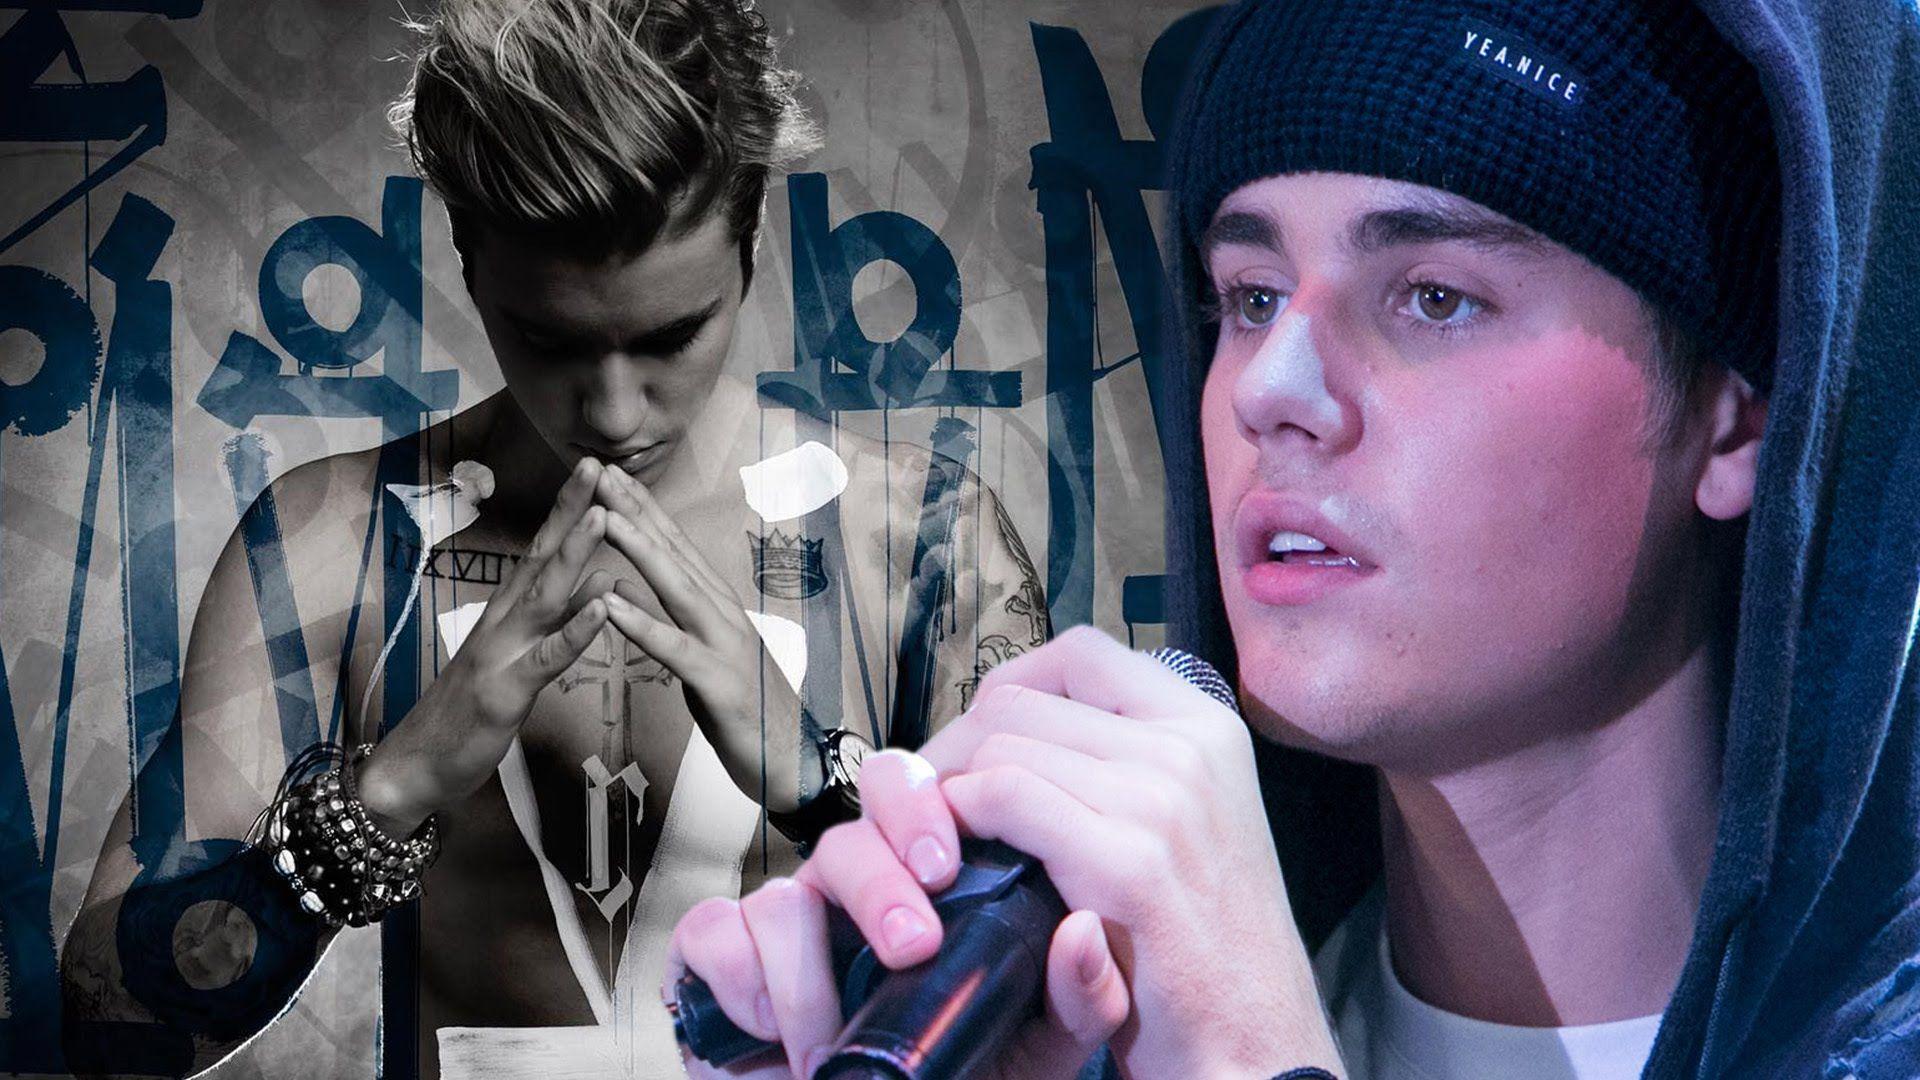 Justin Bieber New Wallpapers 2016